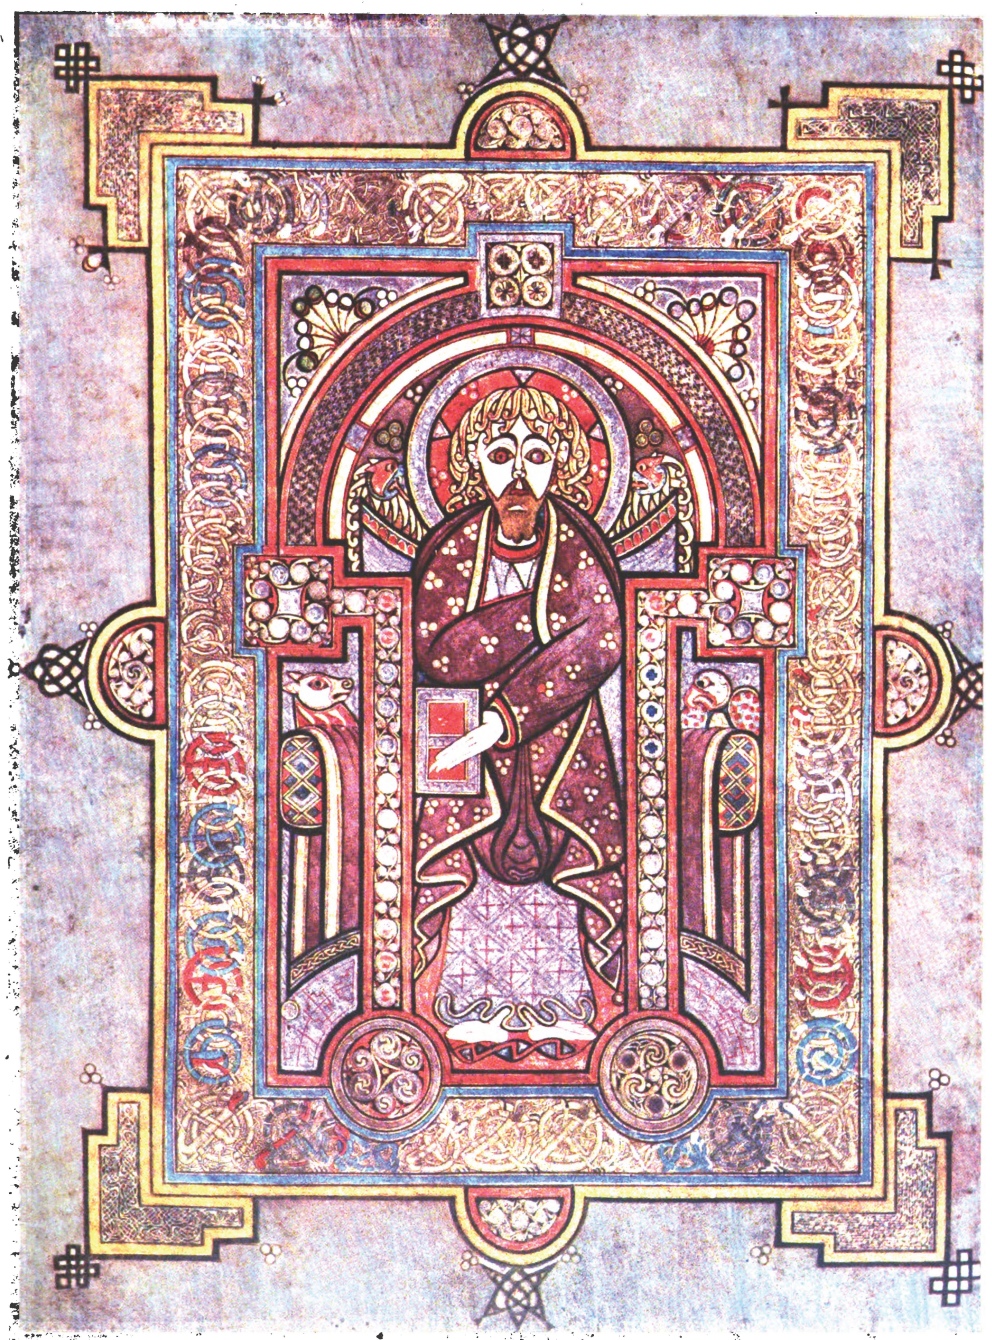 The Book of Kells: Image and Text / Student Exhibition, MA in Medieval History, UCC